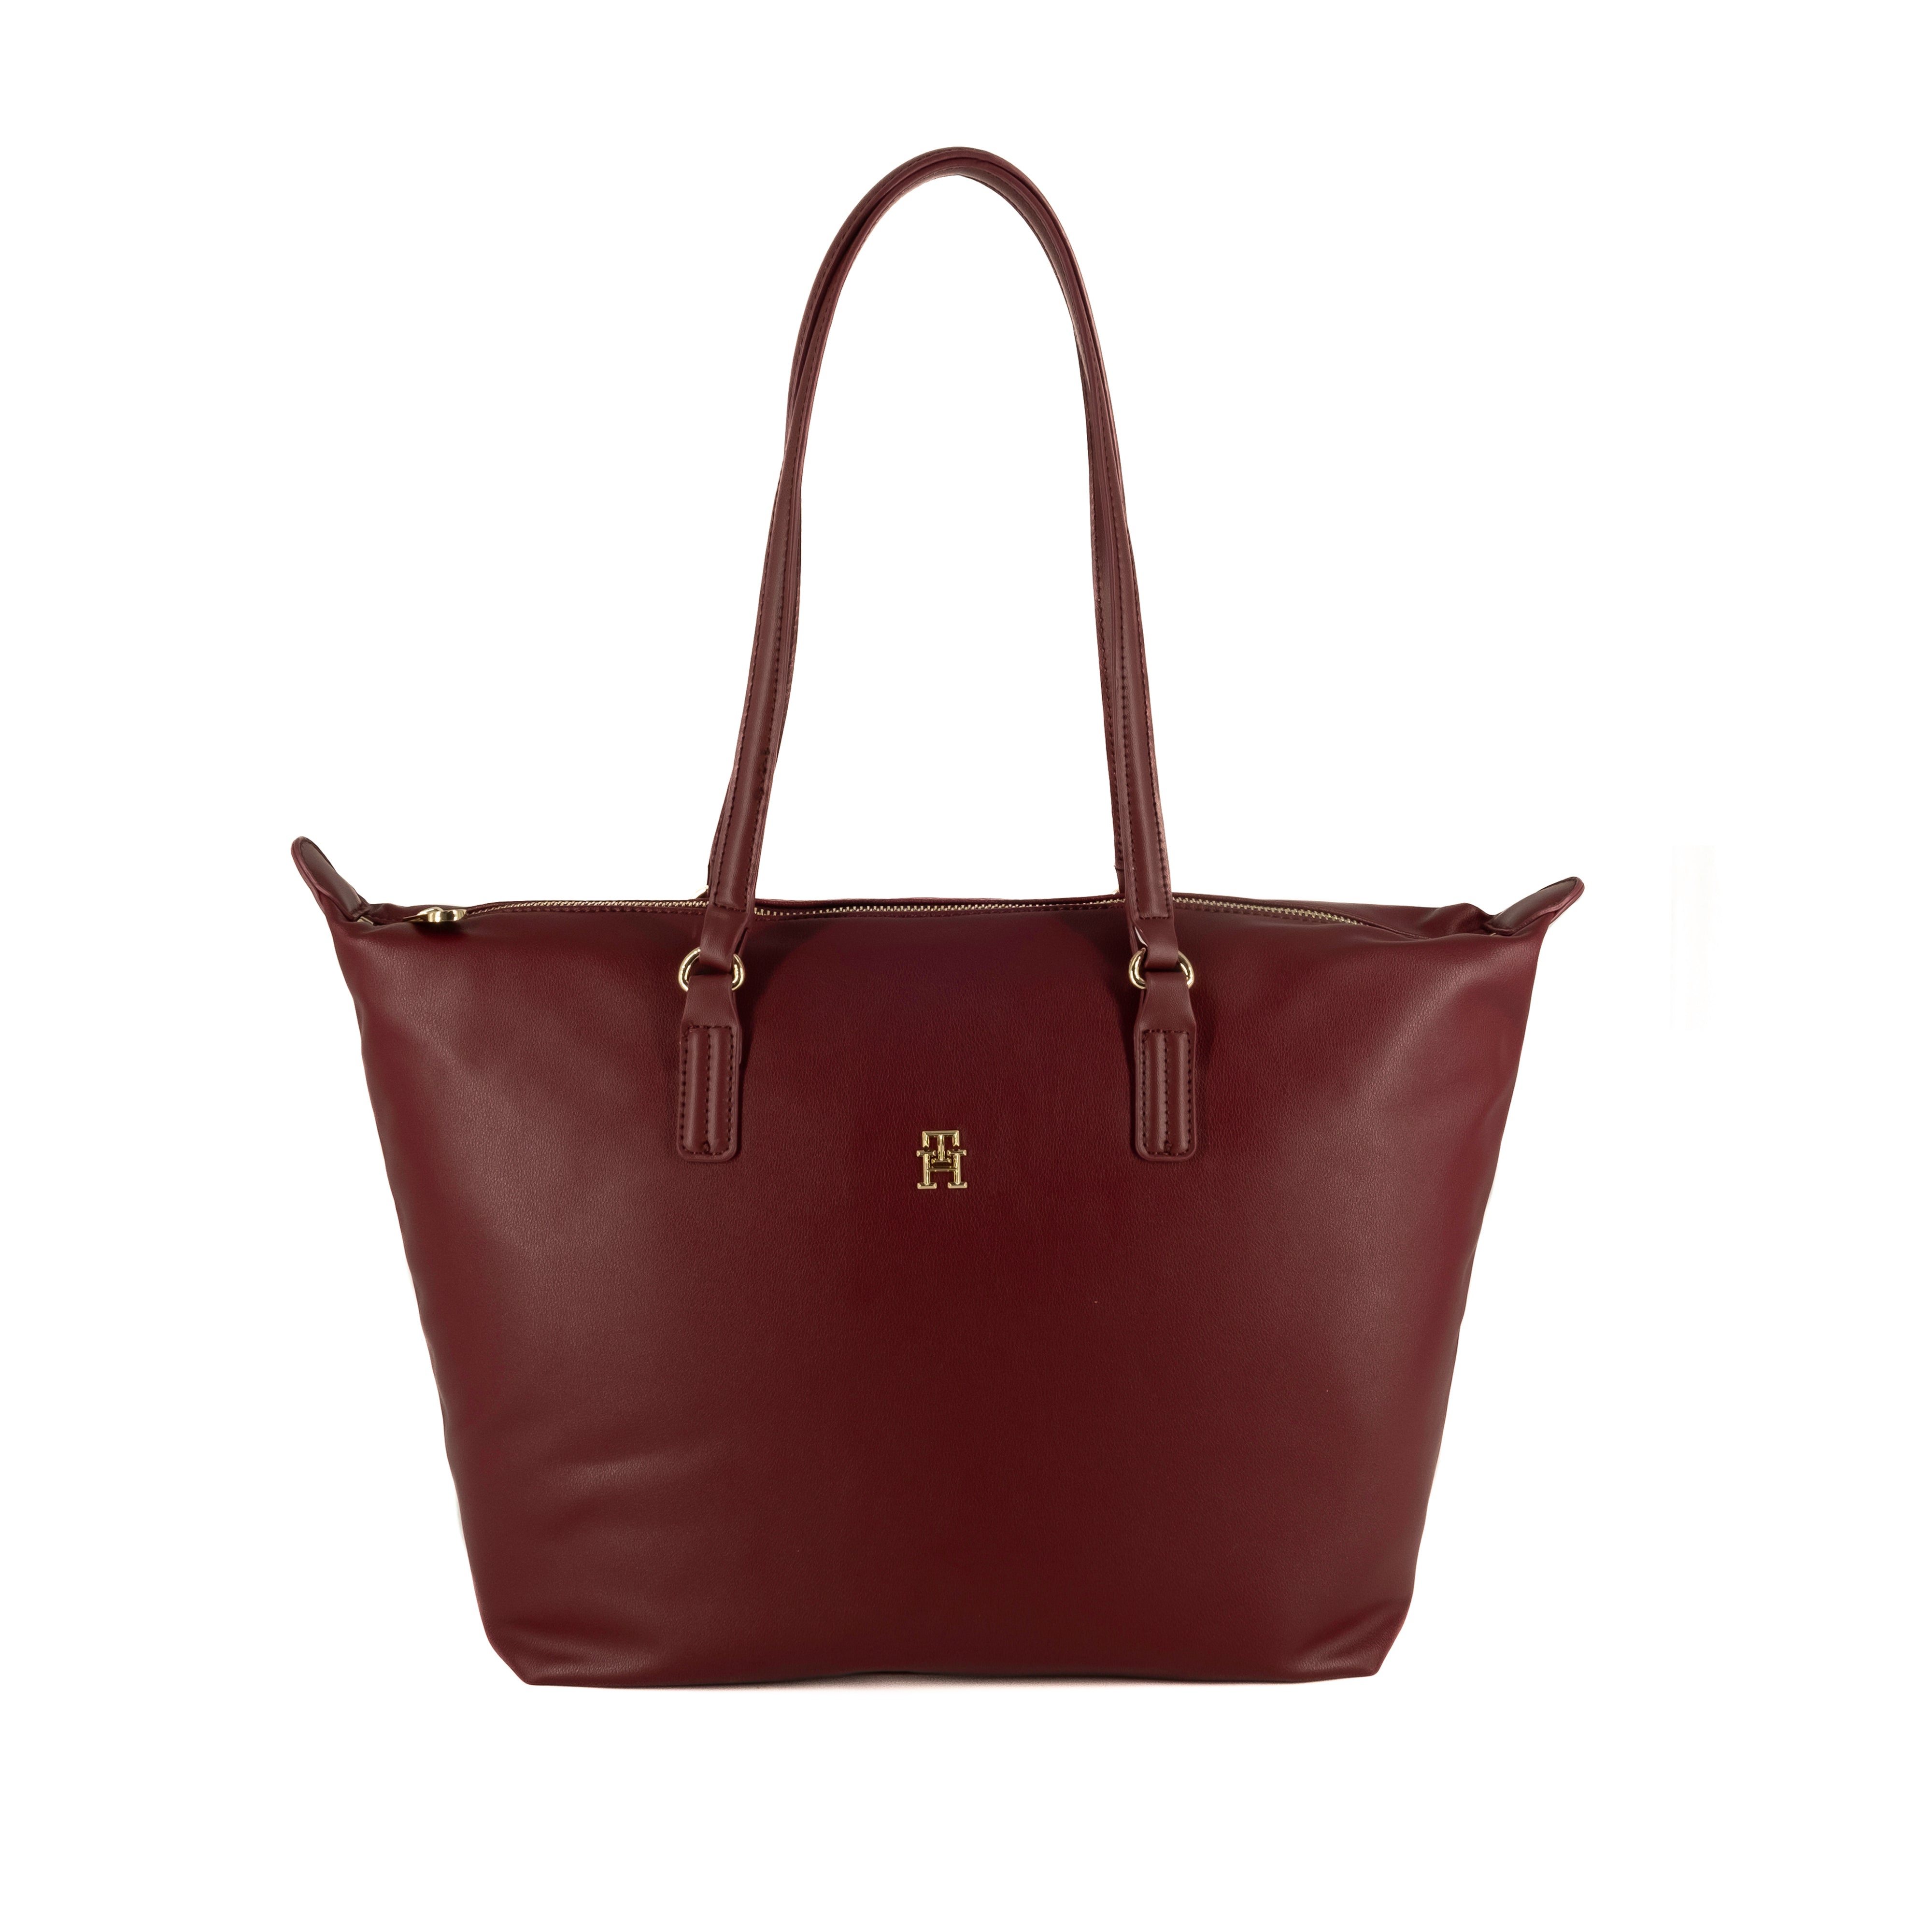 Tommy Hilfiger Tote Bag "Poppy" Red